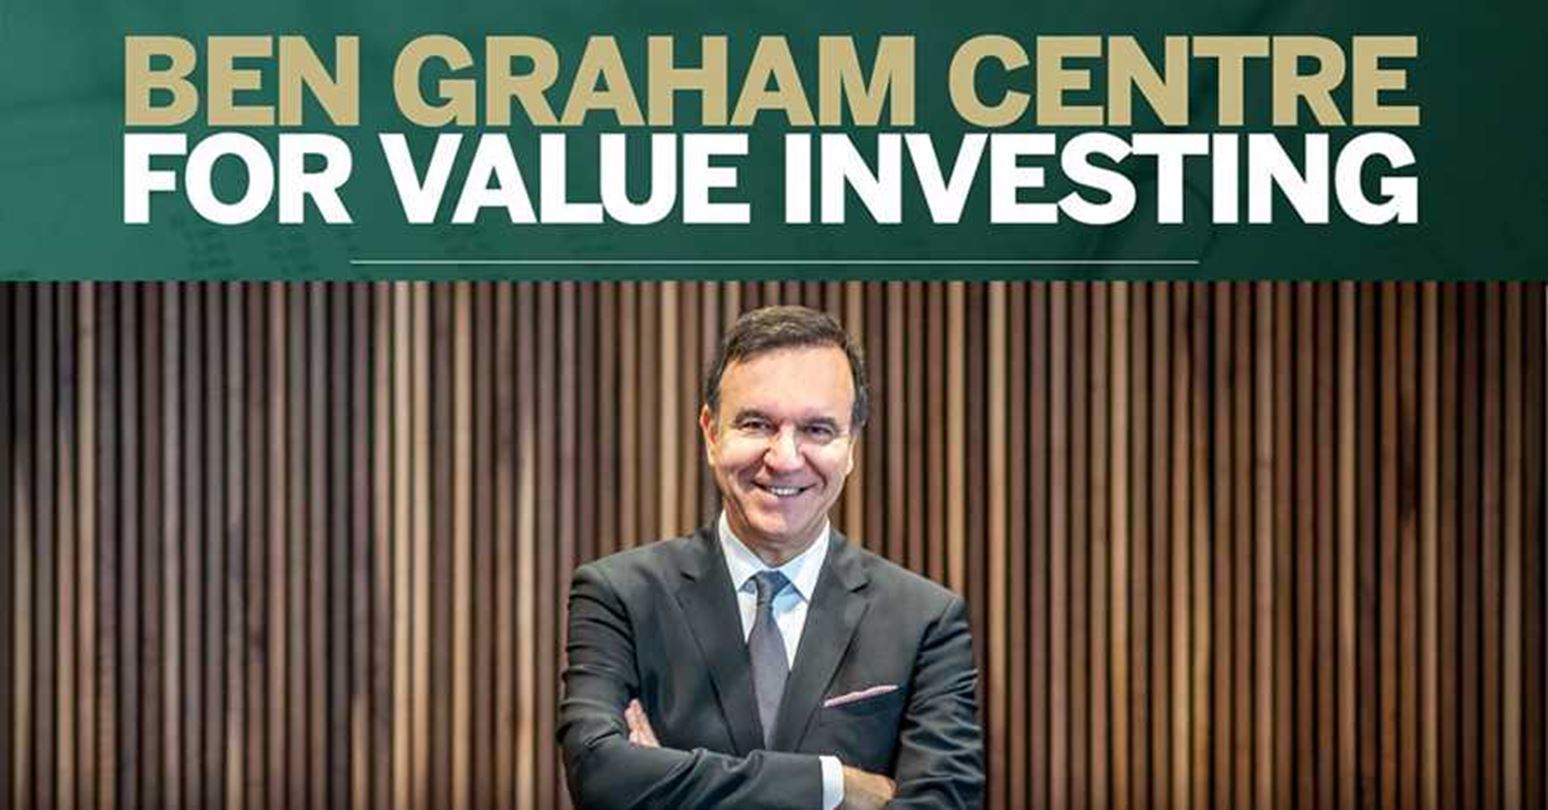 "How can Greece attract investment by creating value-individual stocks could do well"